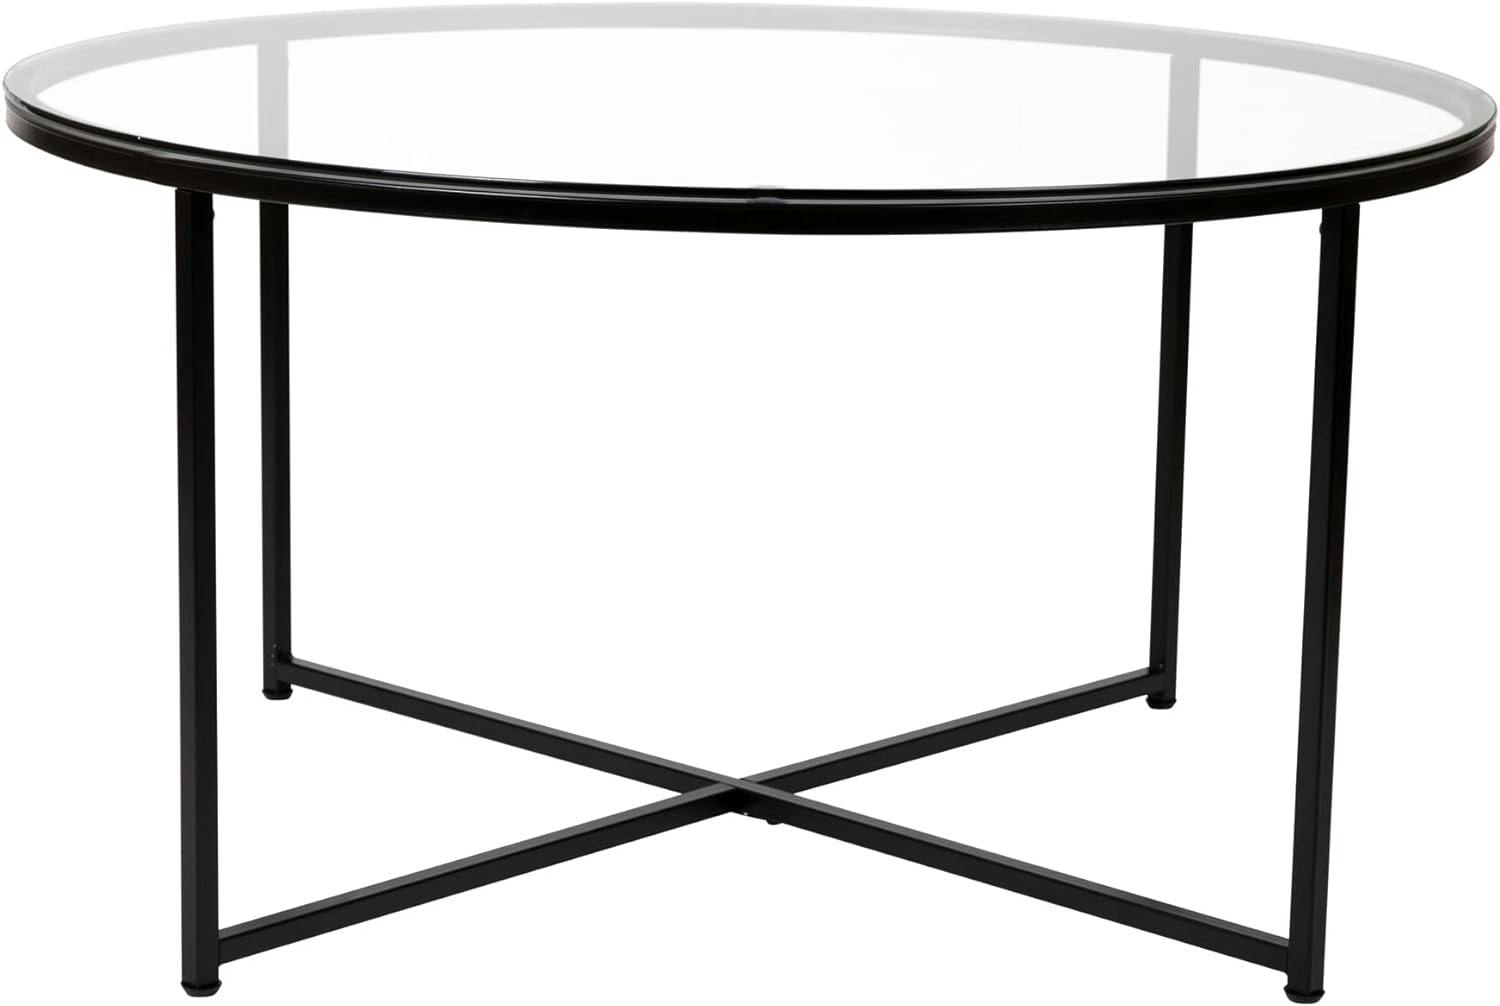 Elegant 35.5" Round Clear Glass Coffee Table with Matte Black Frame